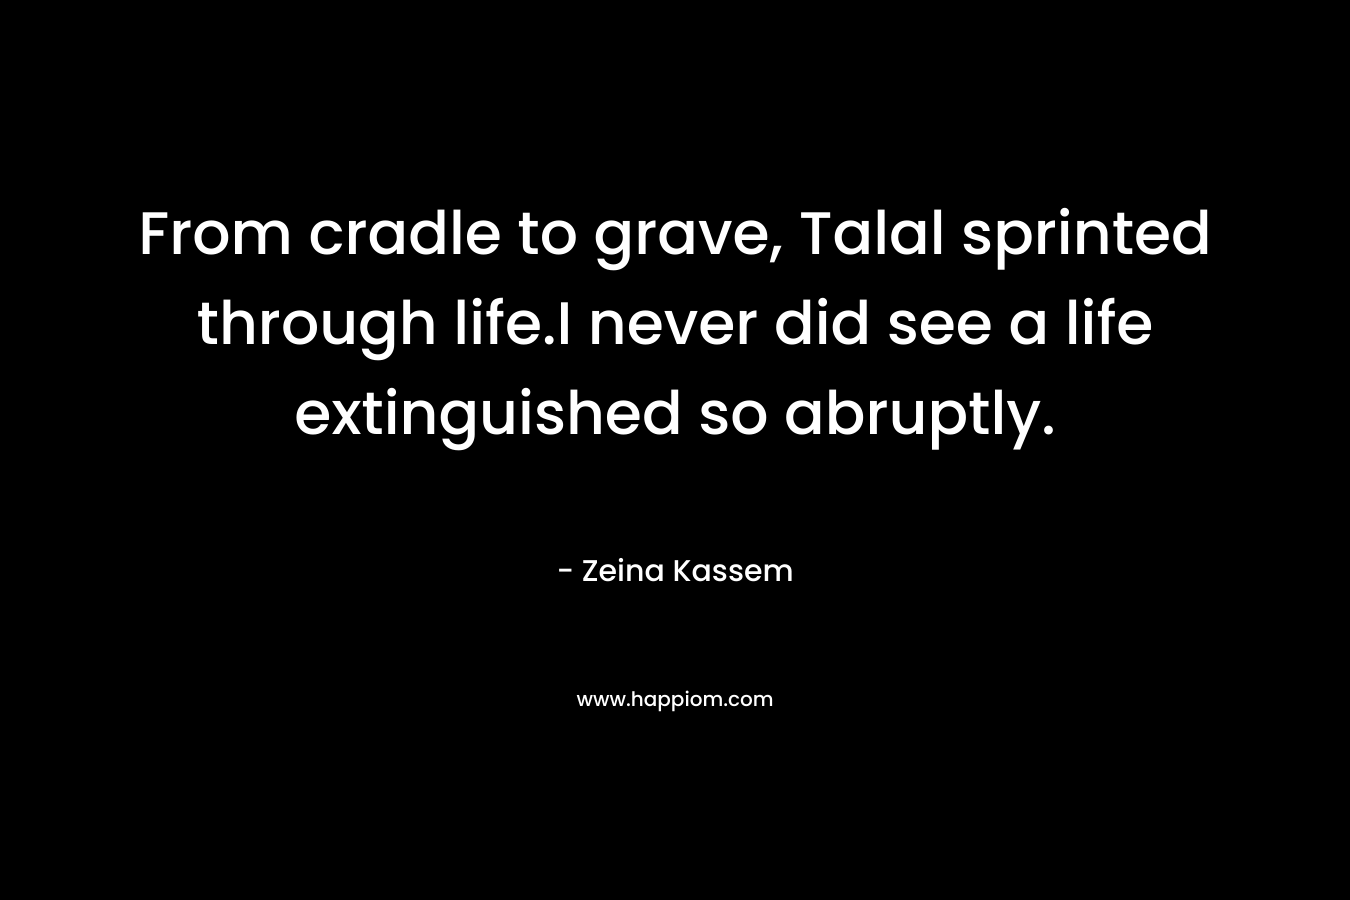 From cradle to grave, Talal sprinted through life.I never did see a life extinguished so abruptly. – Zeina Kassem